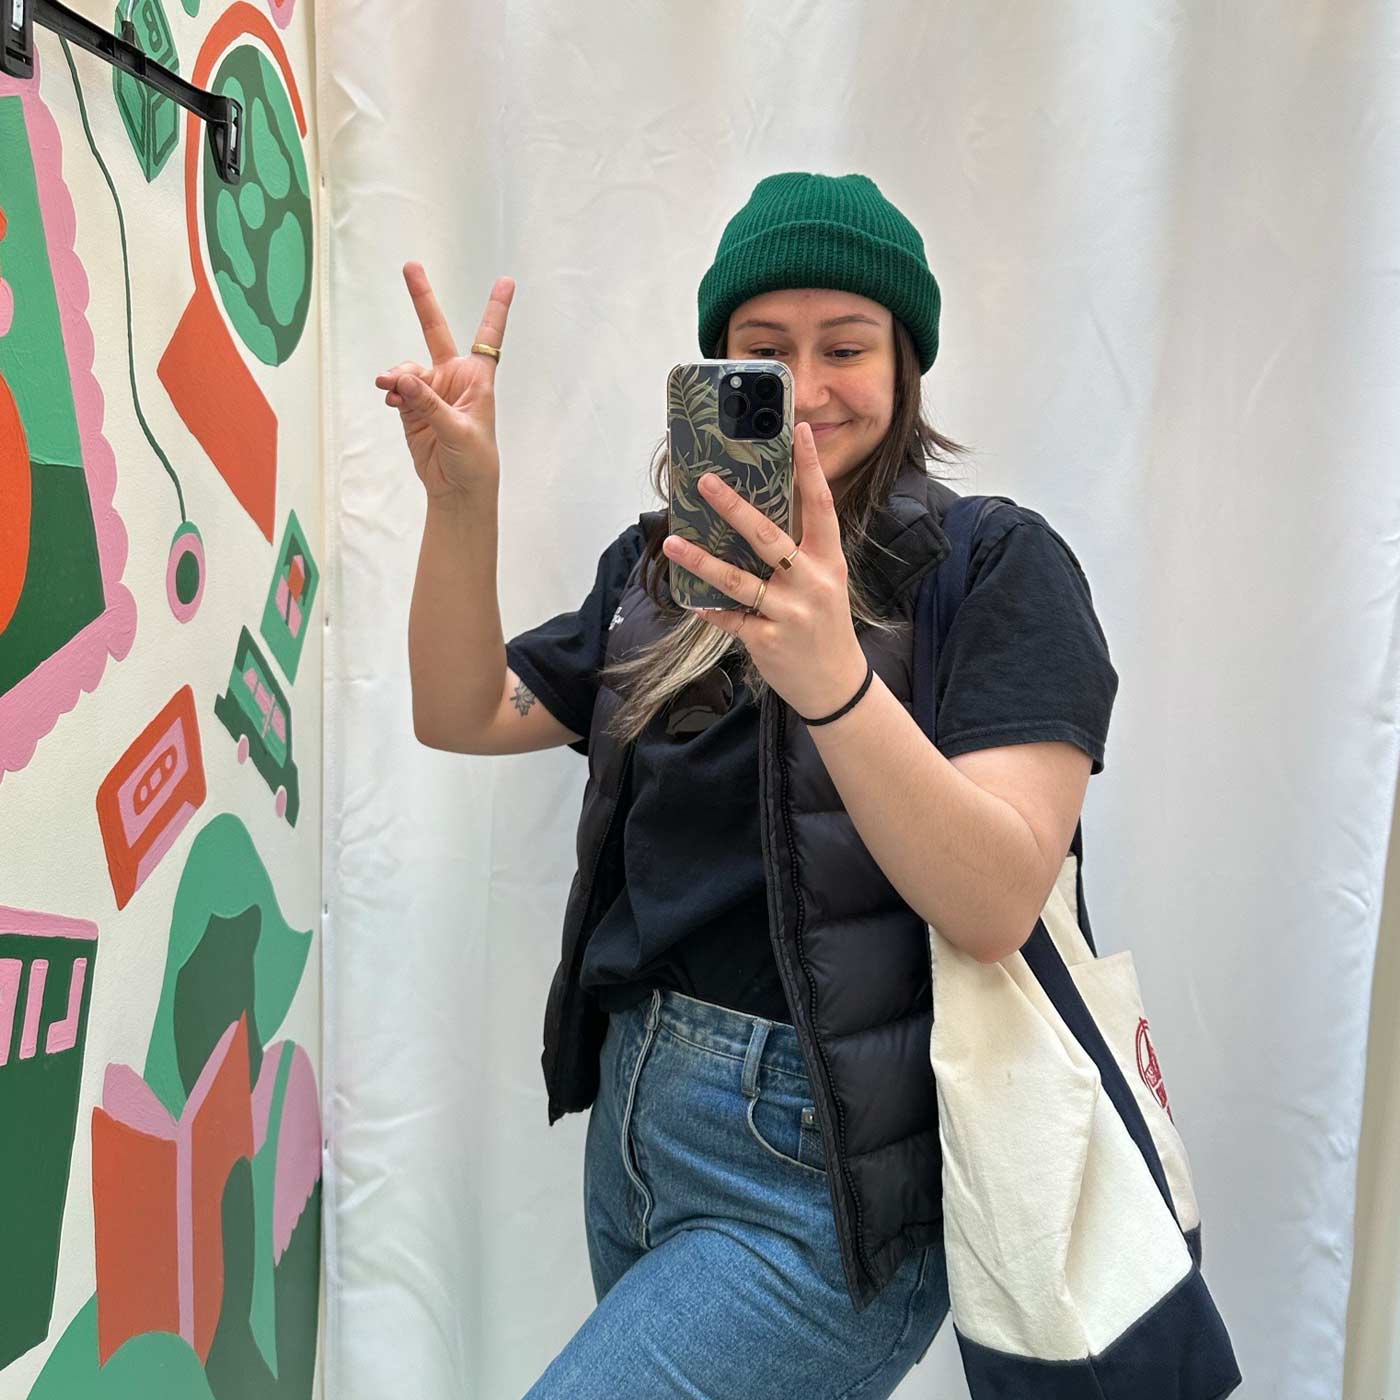 Mackenzie Wensauer flashes a peace sign in a thrift store change room.